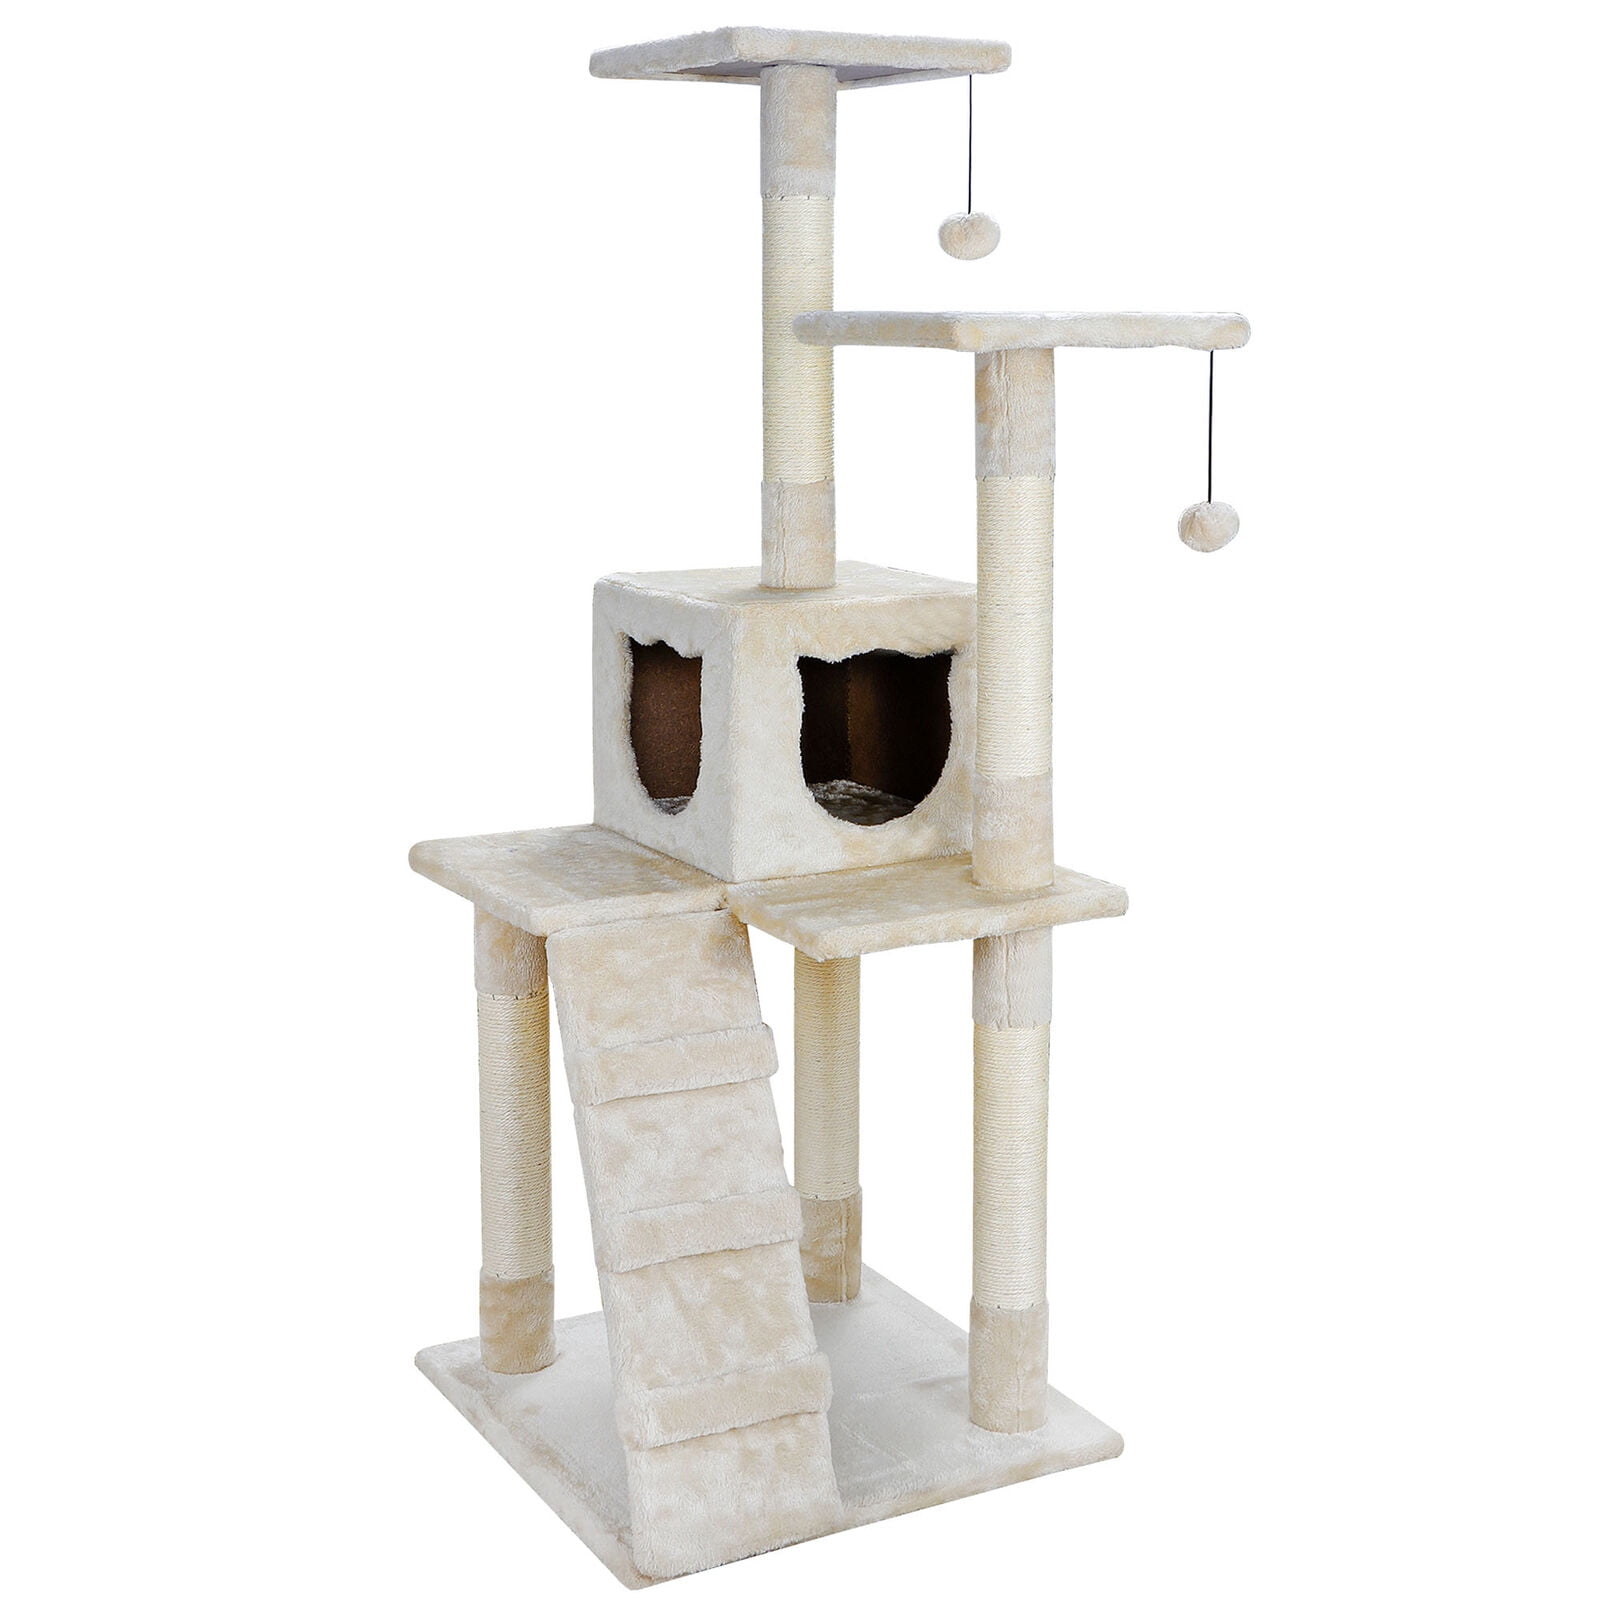 New Cat Tree Tower Condo Furniture Scratch Post Kitty Pet House Play Brown 